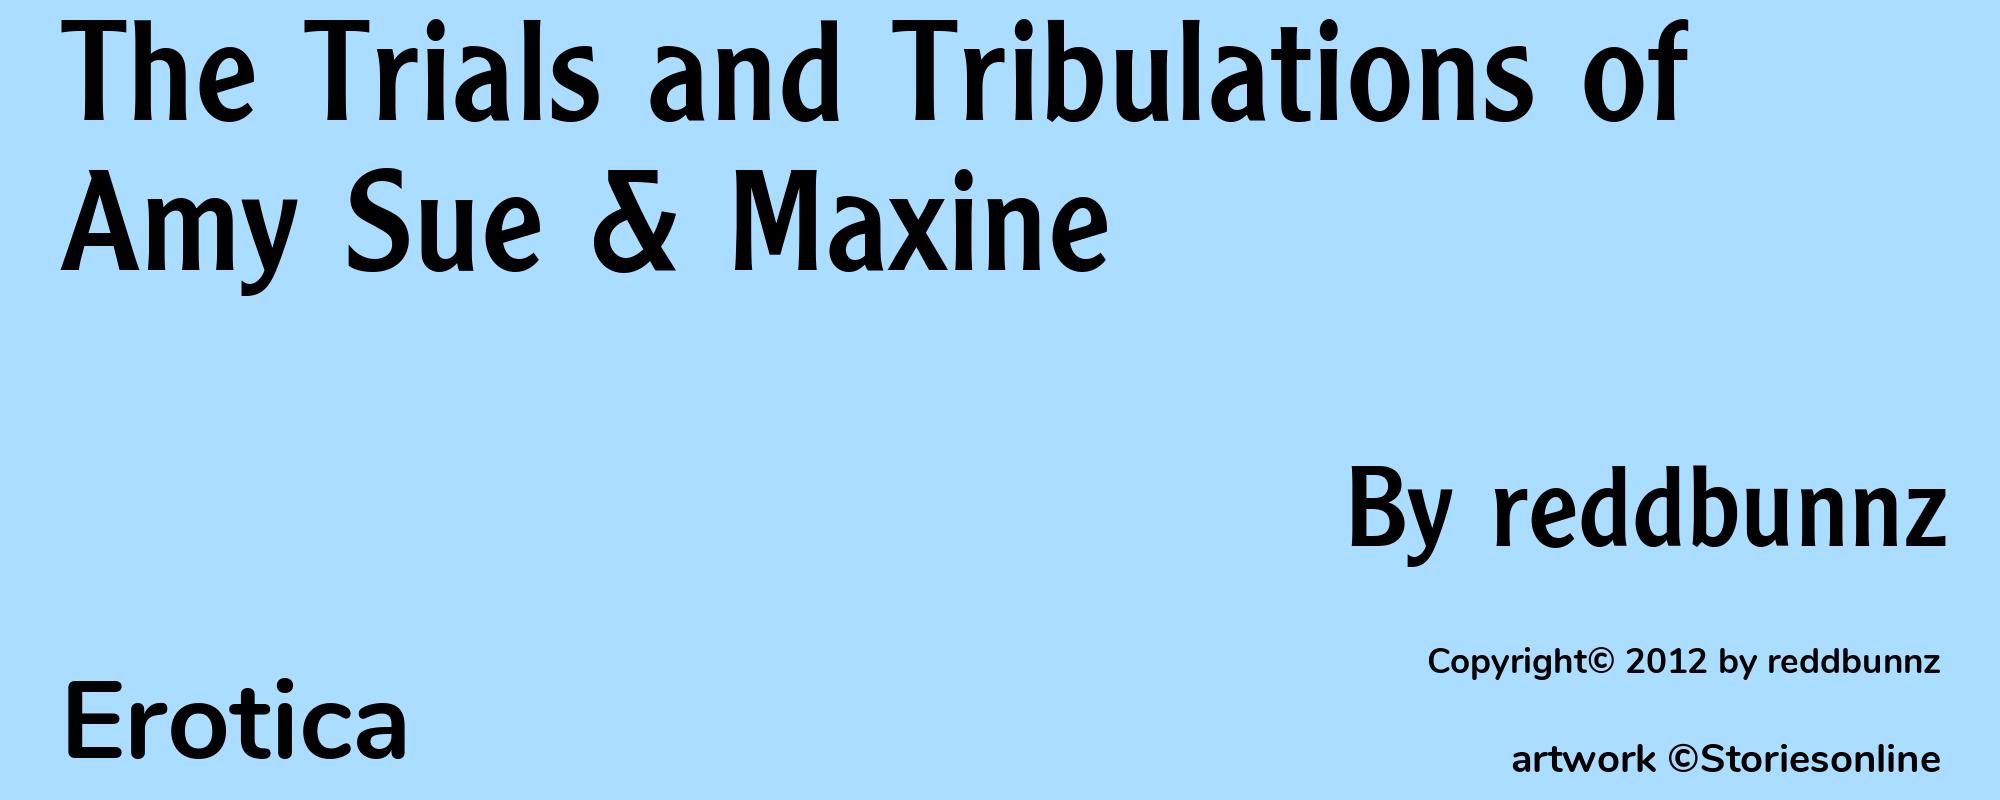 The Trials and Tribulations of Amy Sue & Maxine - Cover